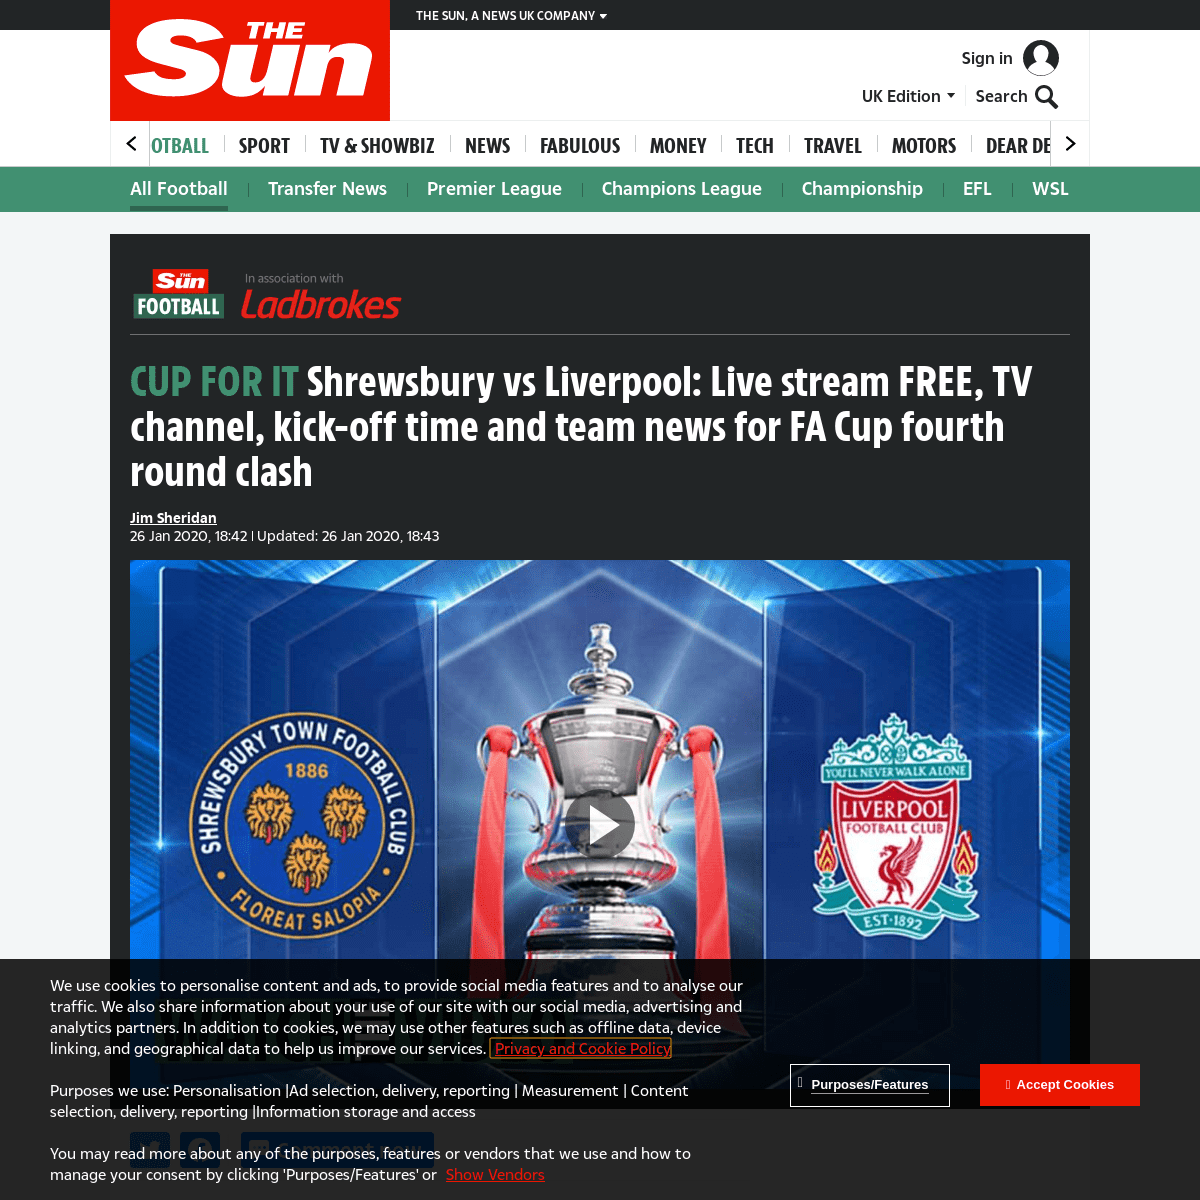 A complete backup of www.thesun.co.uk/sport/football/10805654/shrewsbury-liverpool-live-stream-free-tv-channel-team-news-kick-of